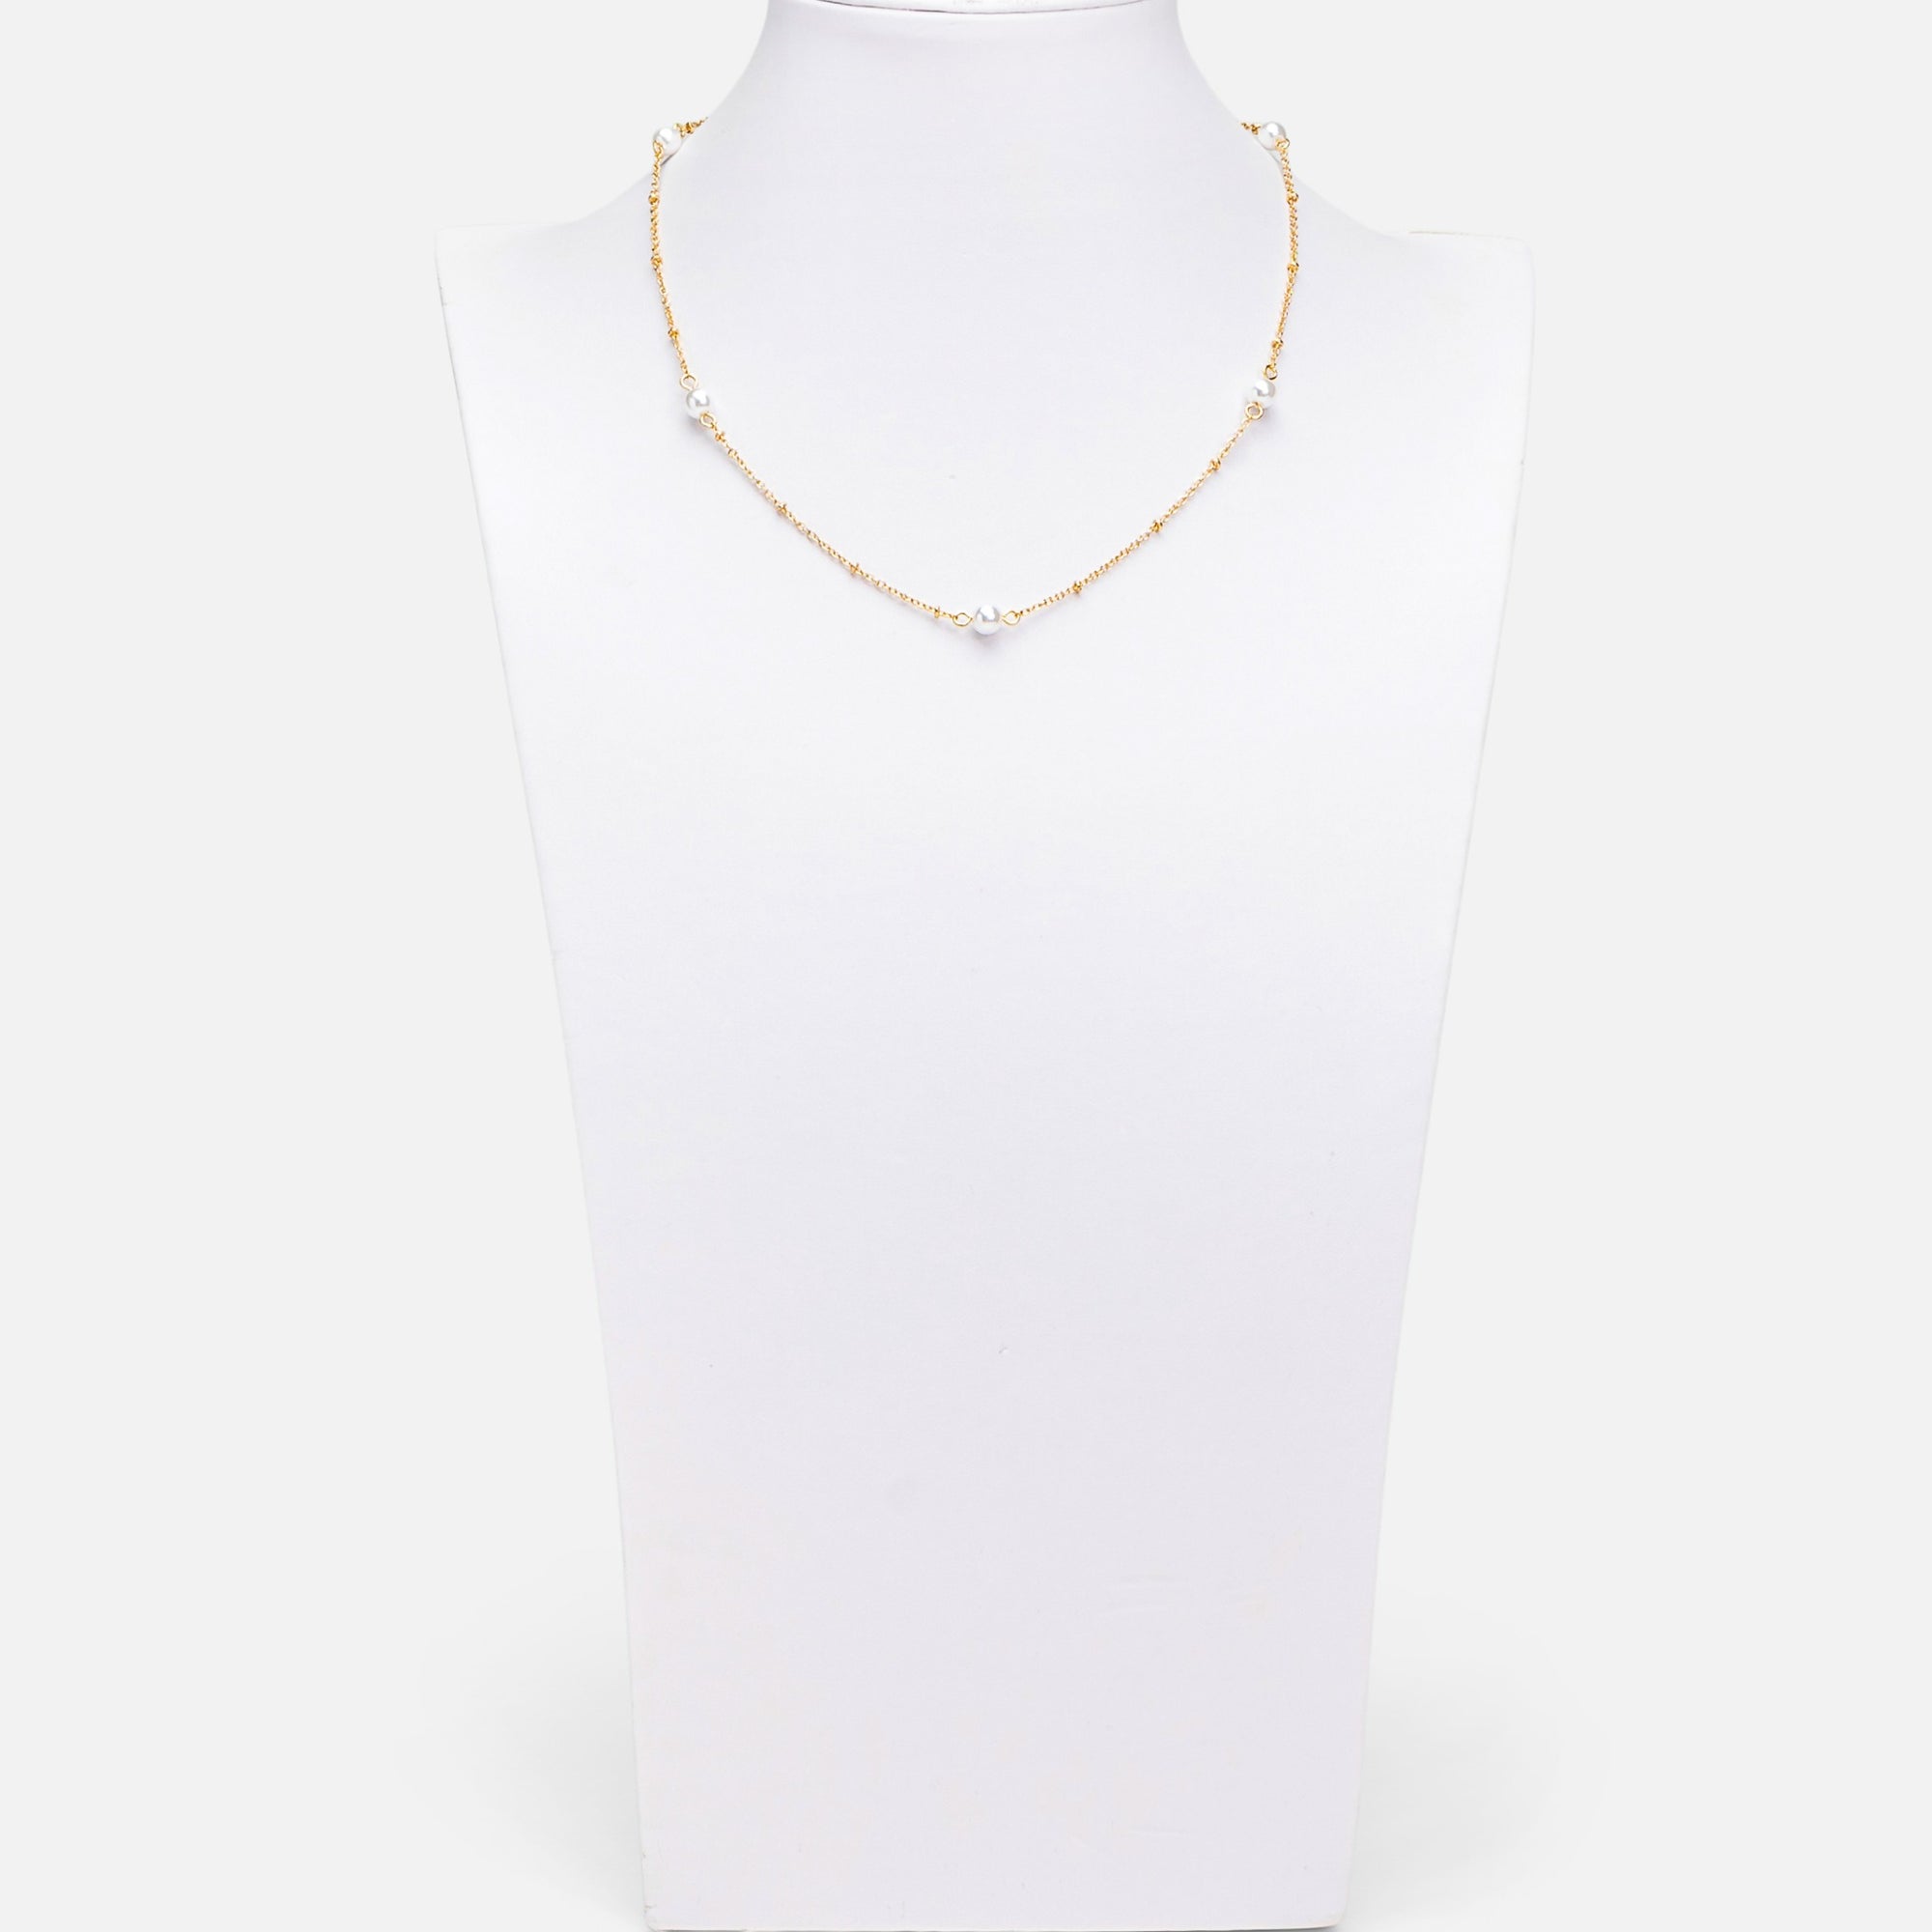 Golden necklace with pearl inserts 